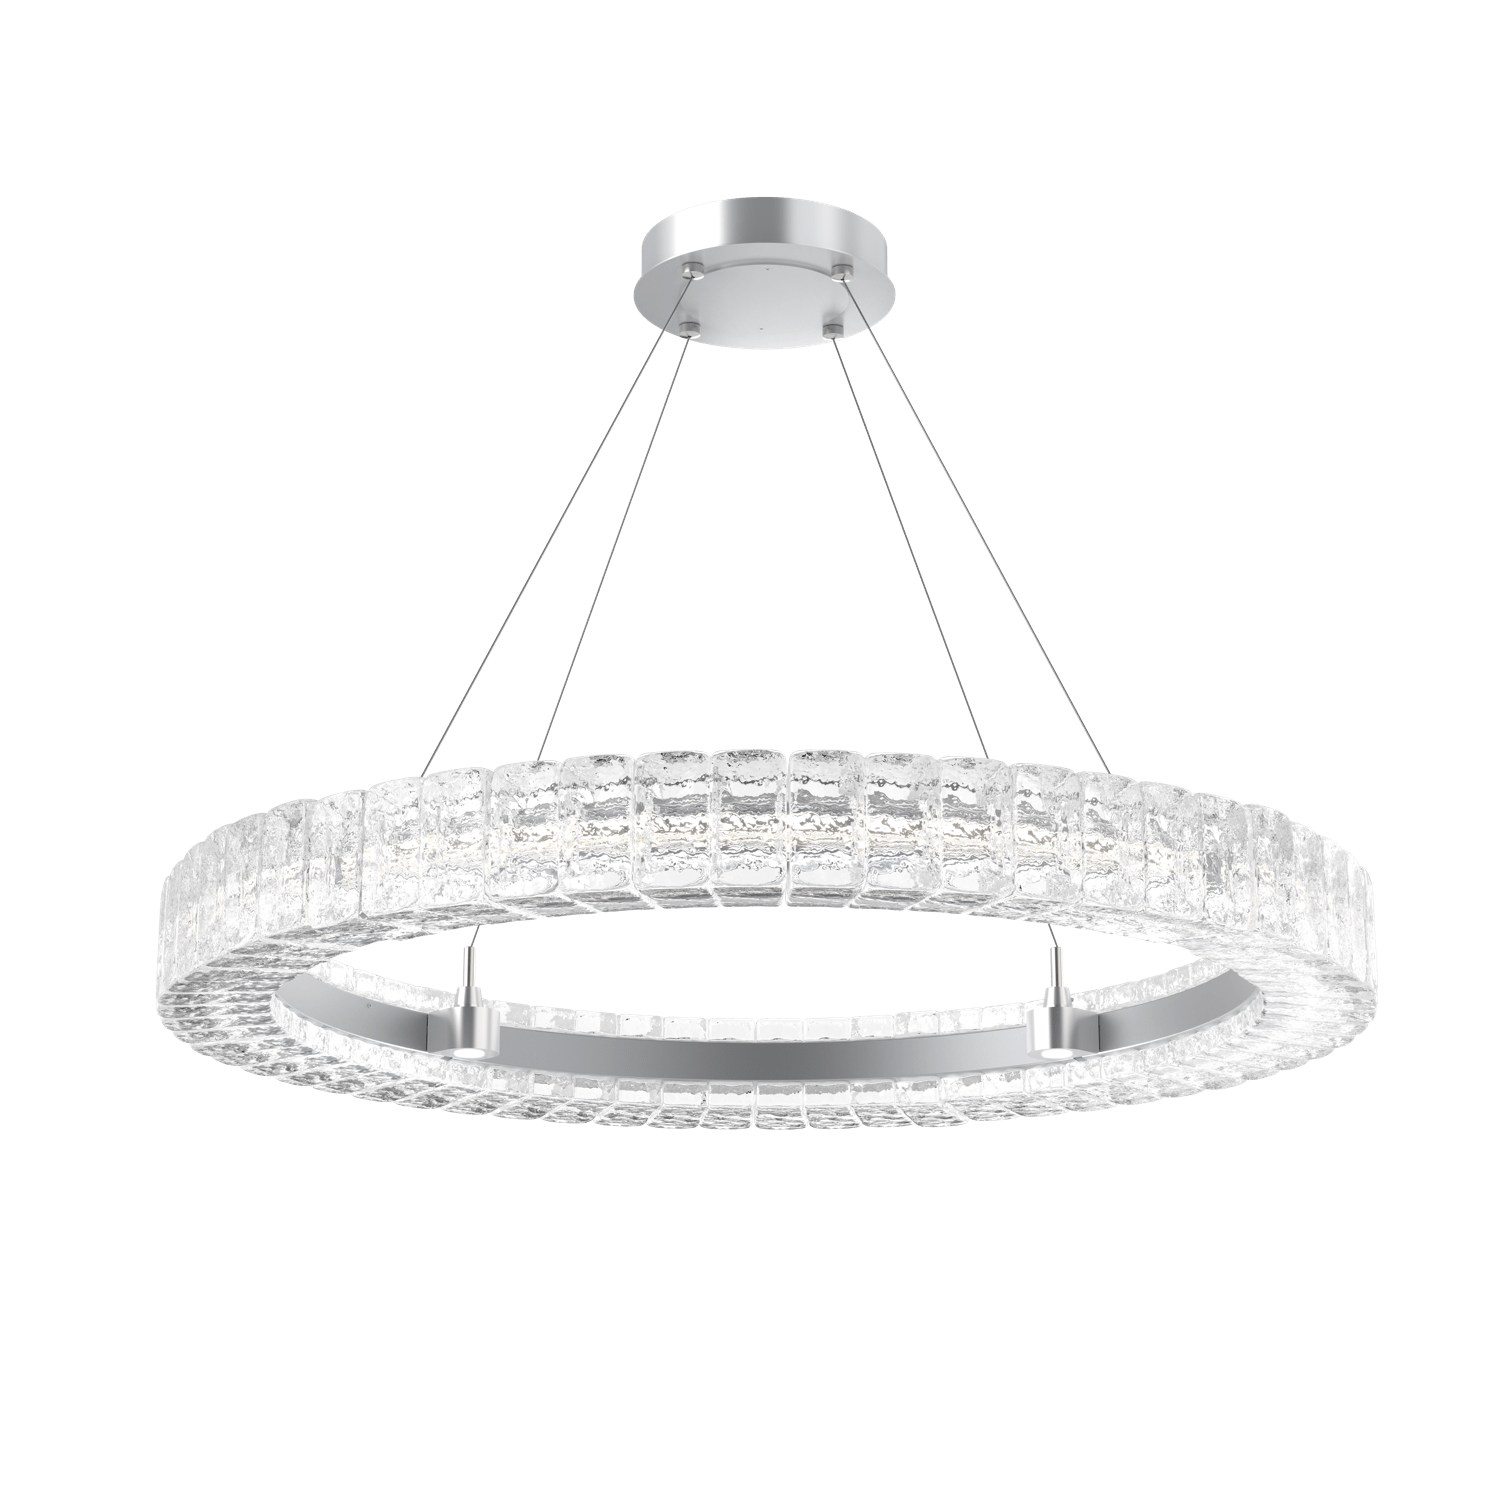 CHB0080-36-CS-Hammerton-Studio-Asscher-36-inch-ring-chandelier-with-classic-silver-finish-and-clear-cast-glass-shades-and-LED-lamping